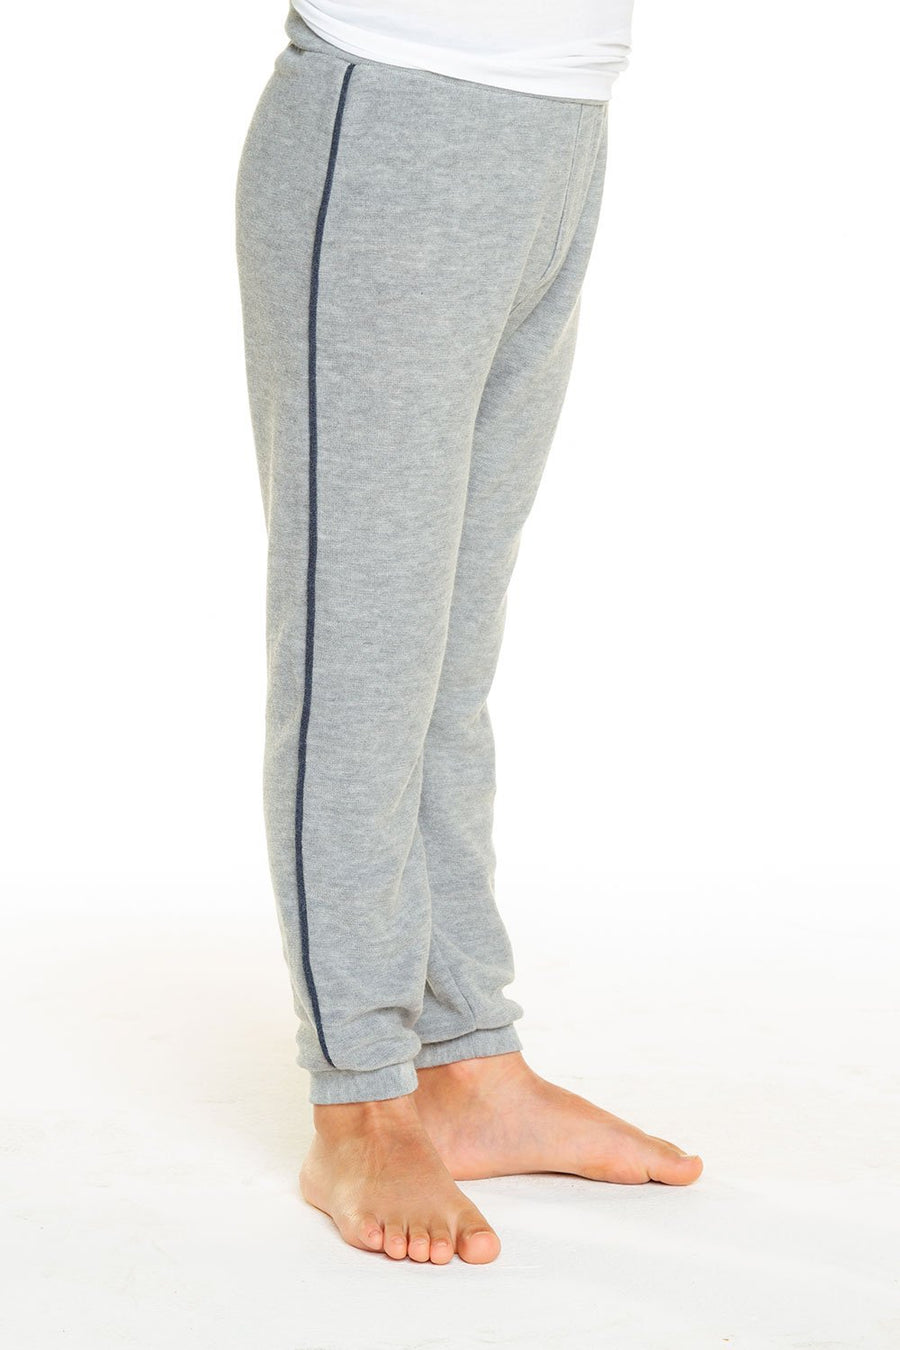 Cozy Knit Lounge Pant Chaser